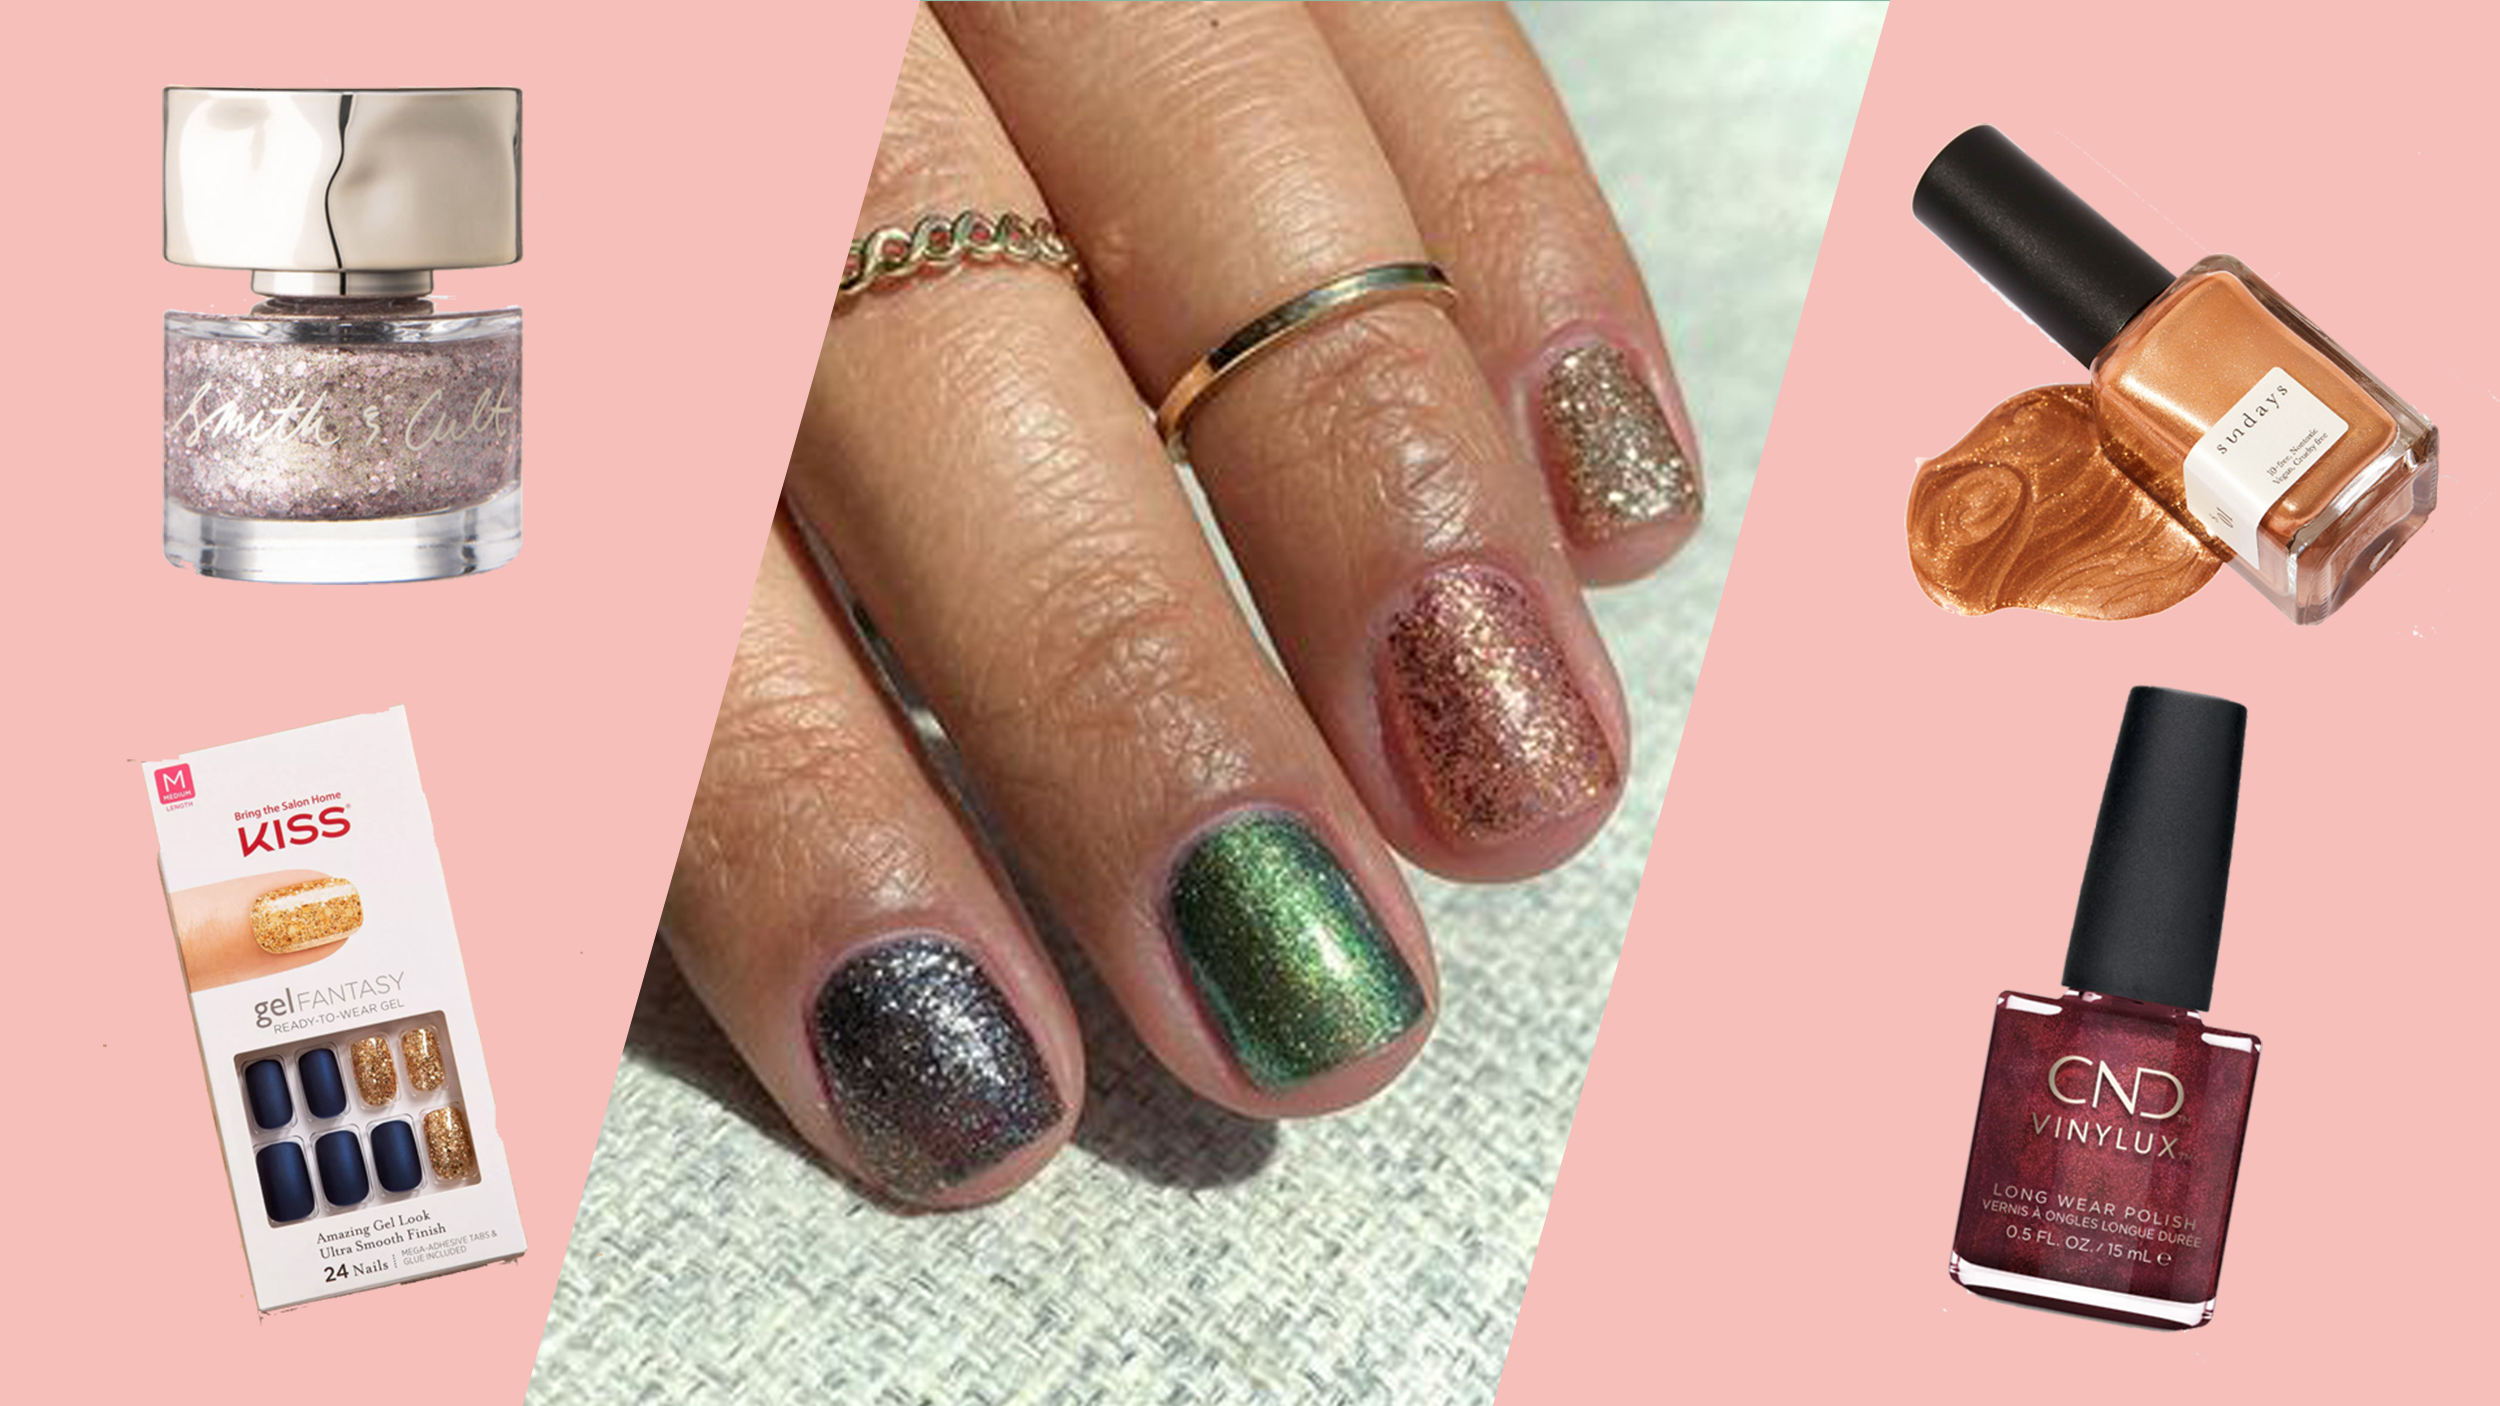 6. Bold New Year's Nail Designs - wide 4